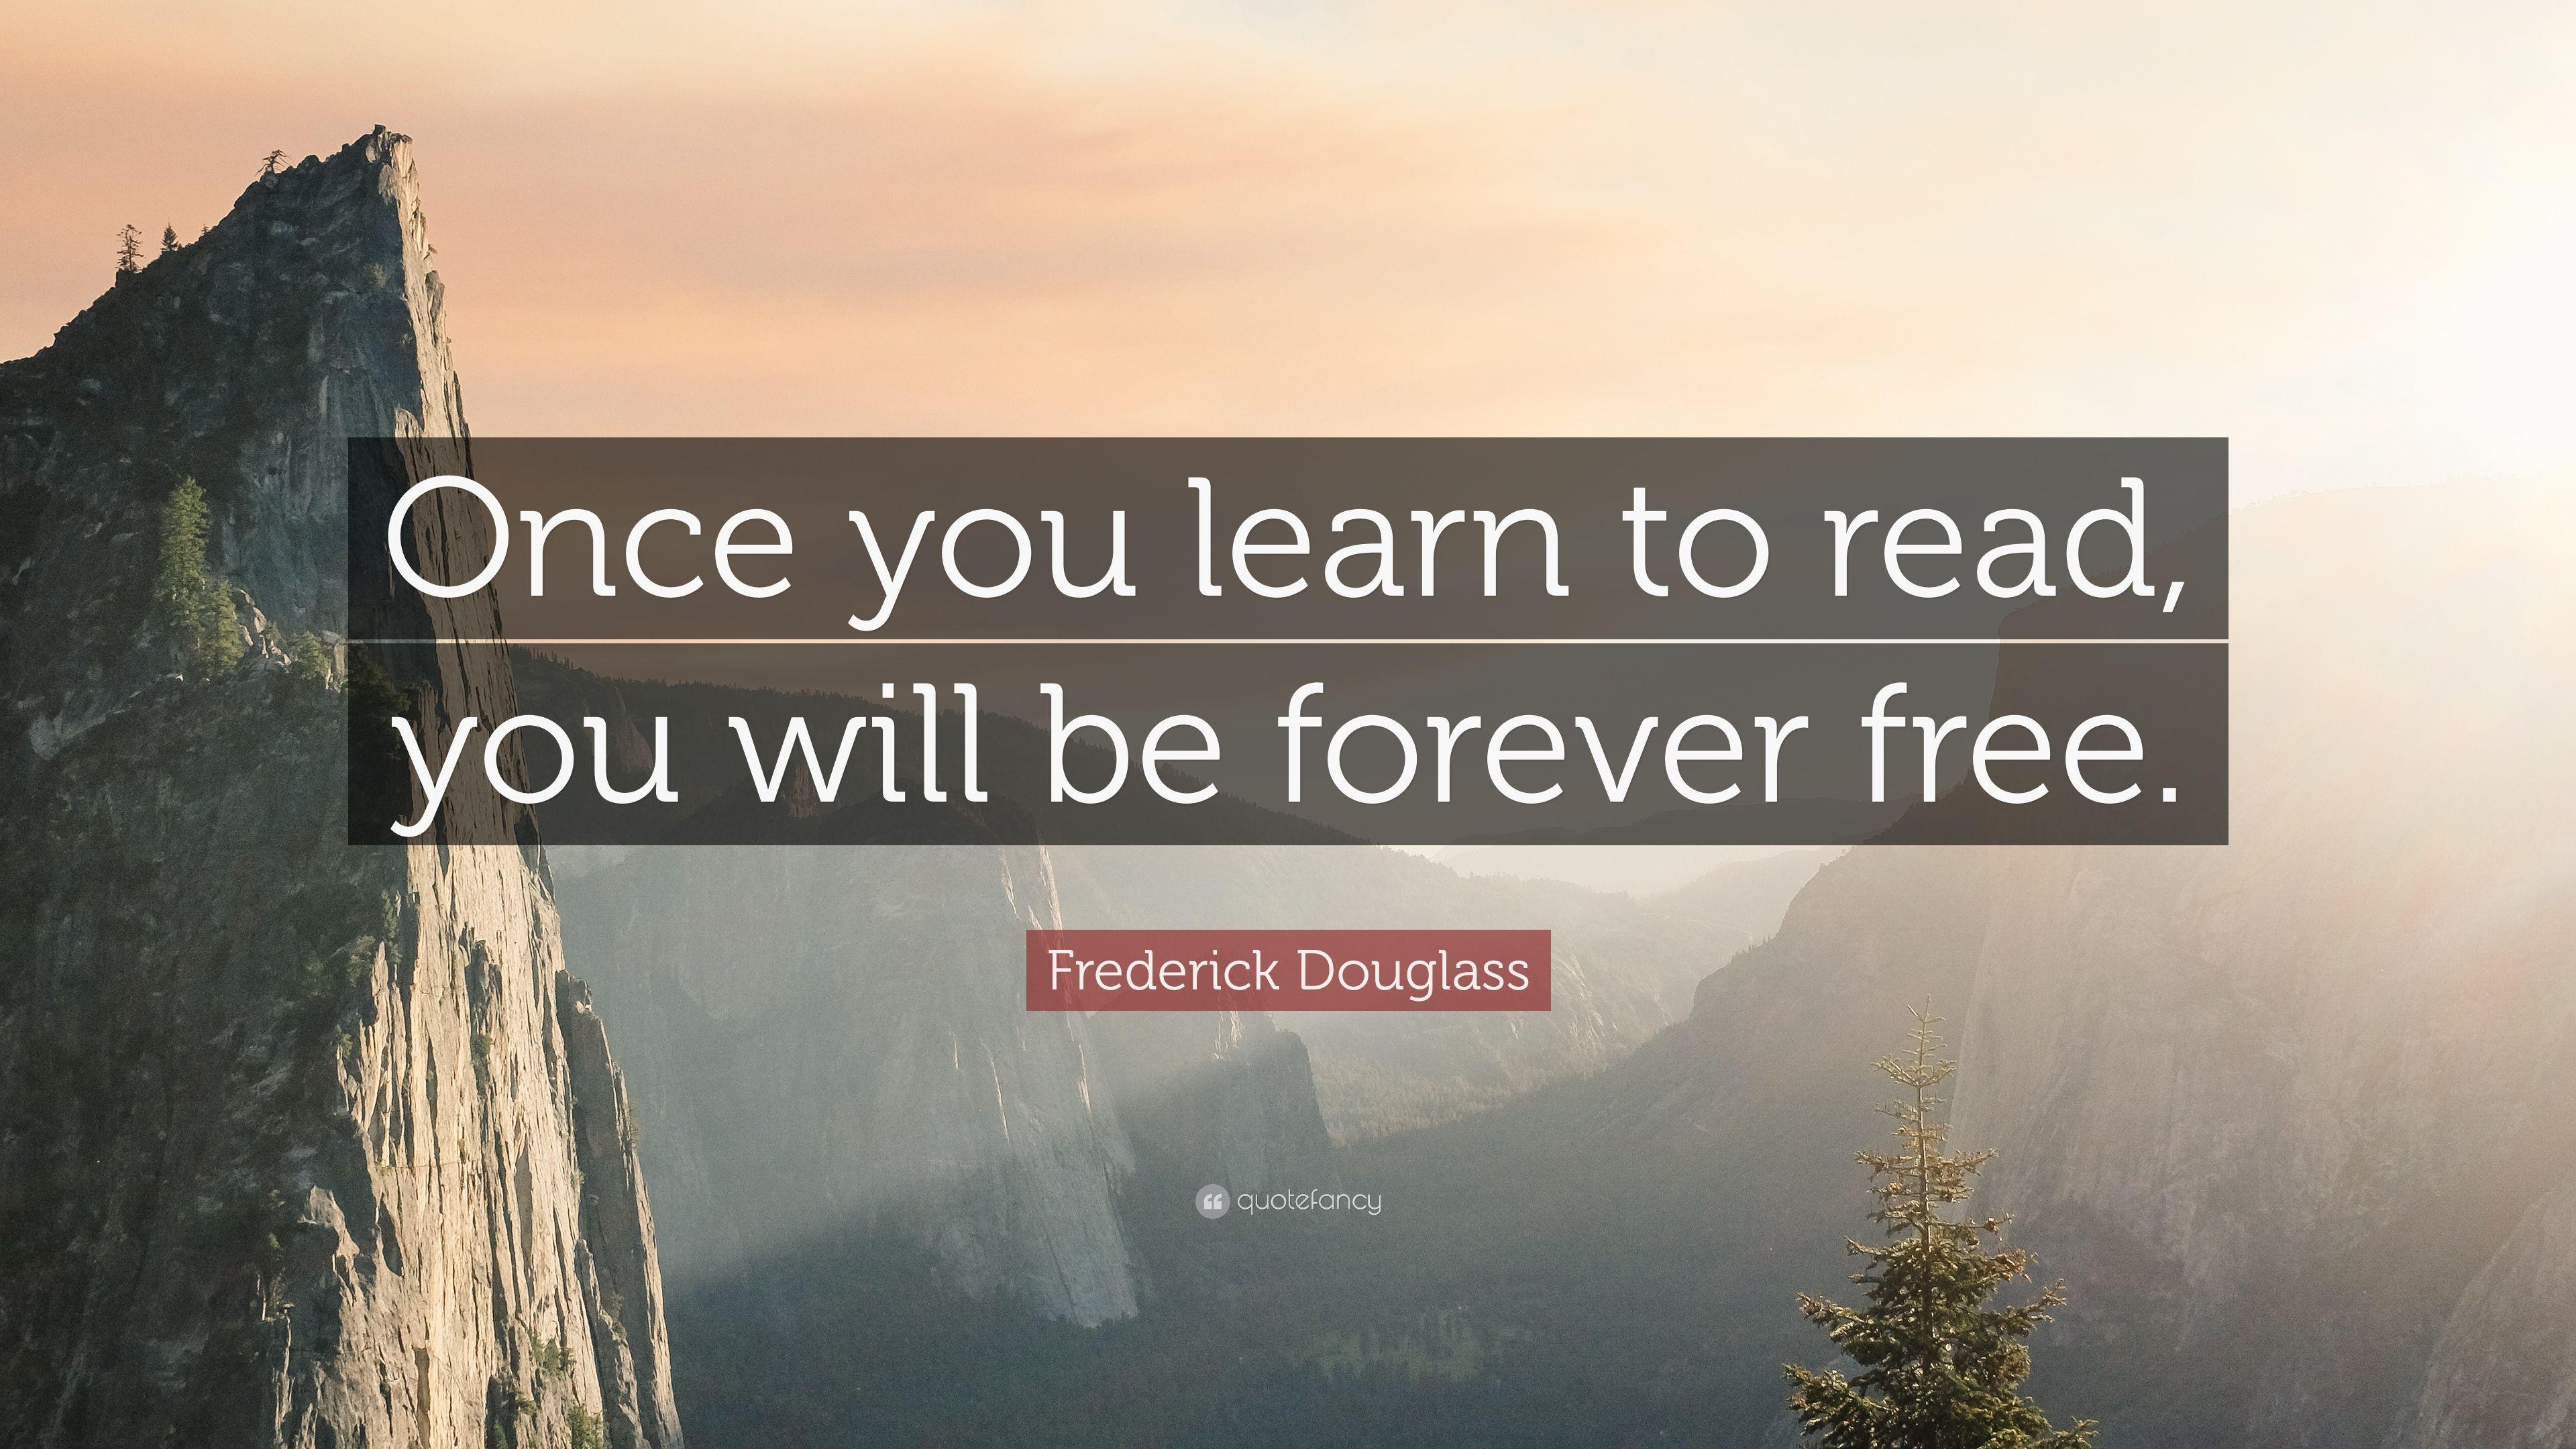 Frederick Douglass Quote: “Once you learn to read, you will be